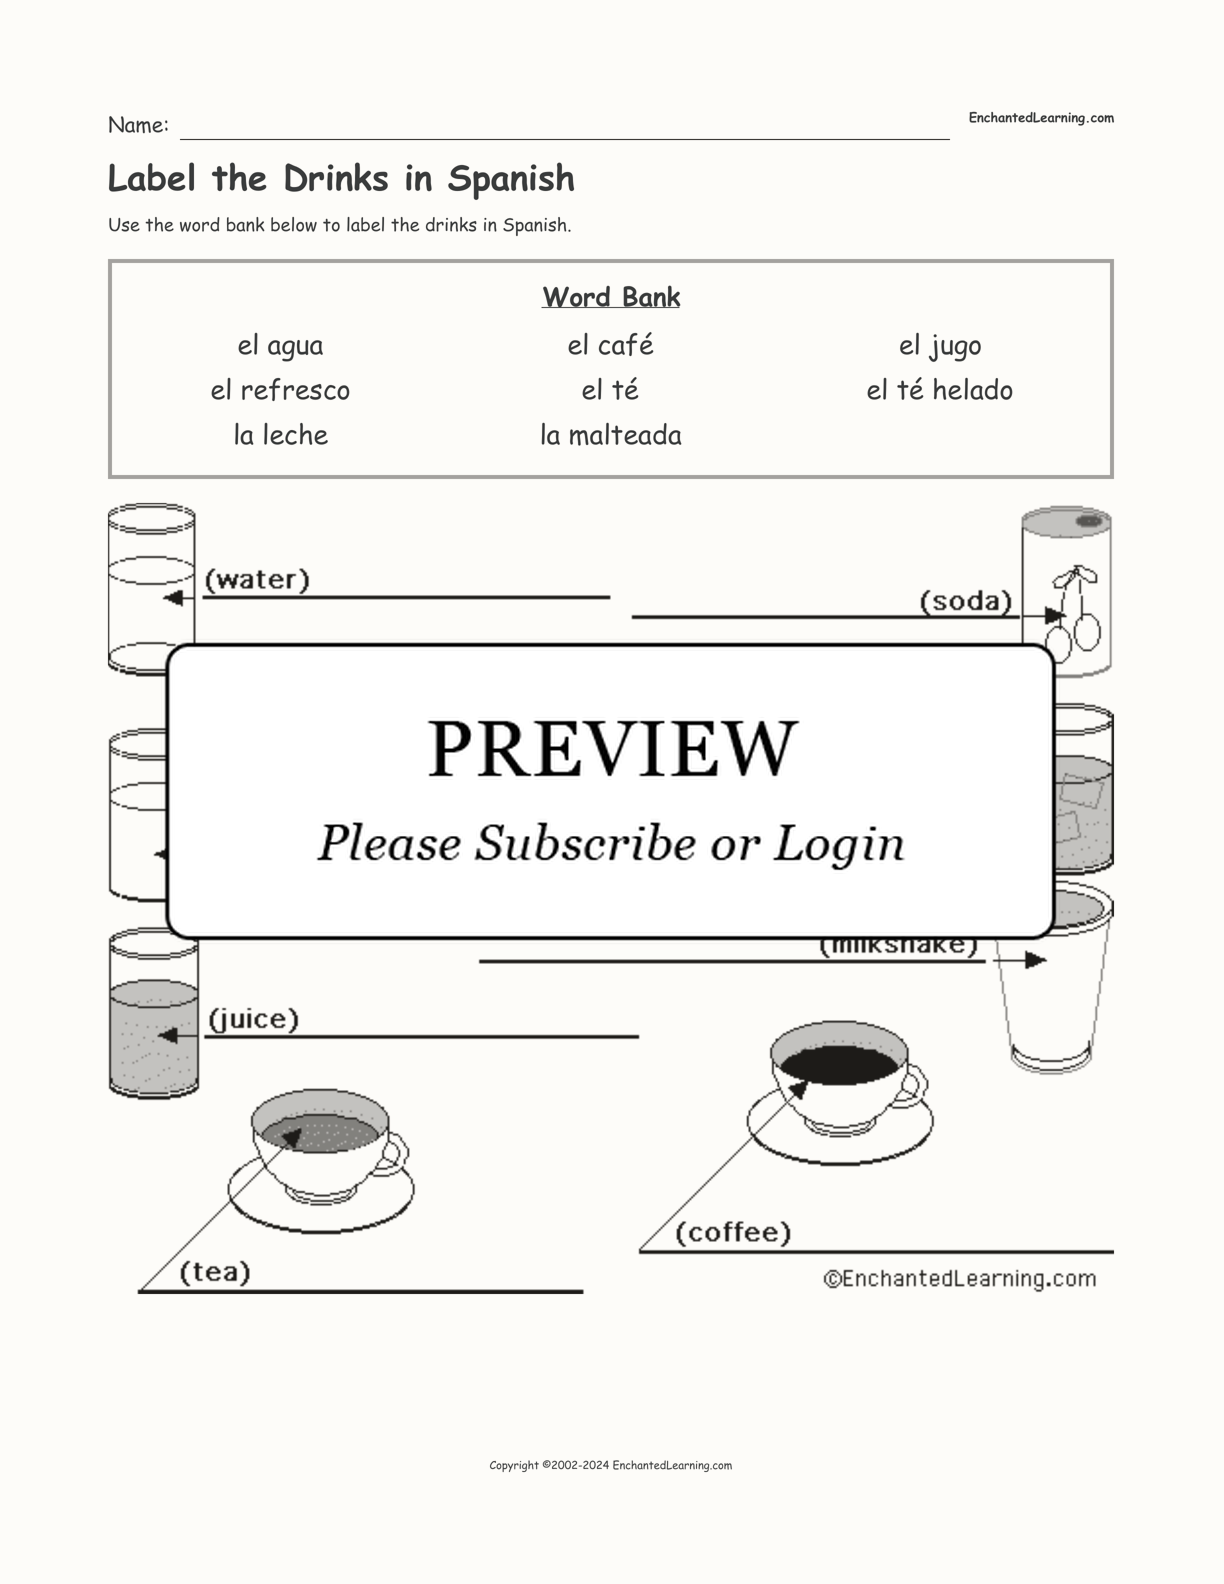 Label the Drinks in Spanish interactive worksheet page 1